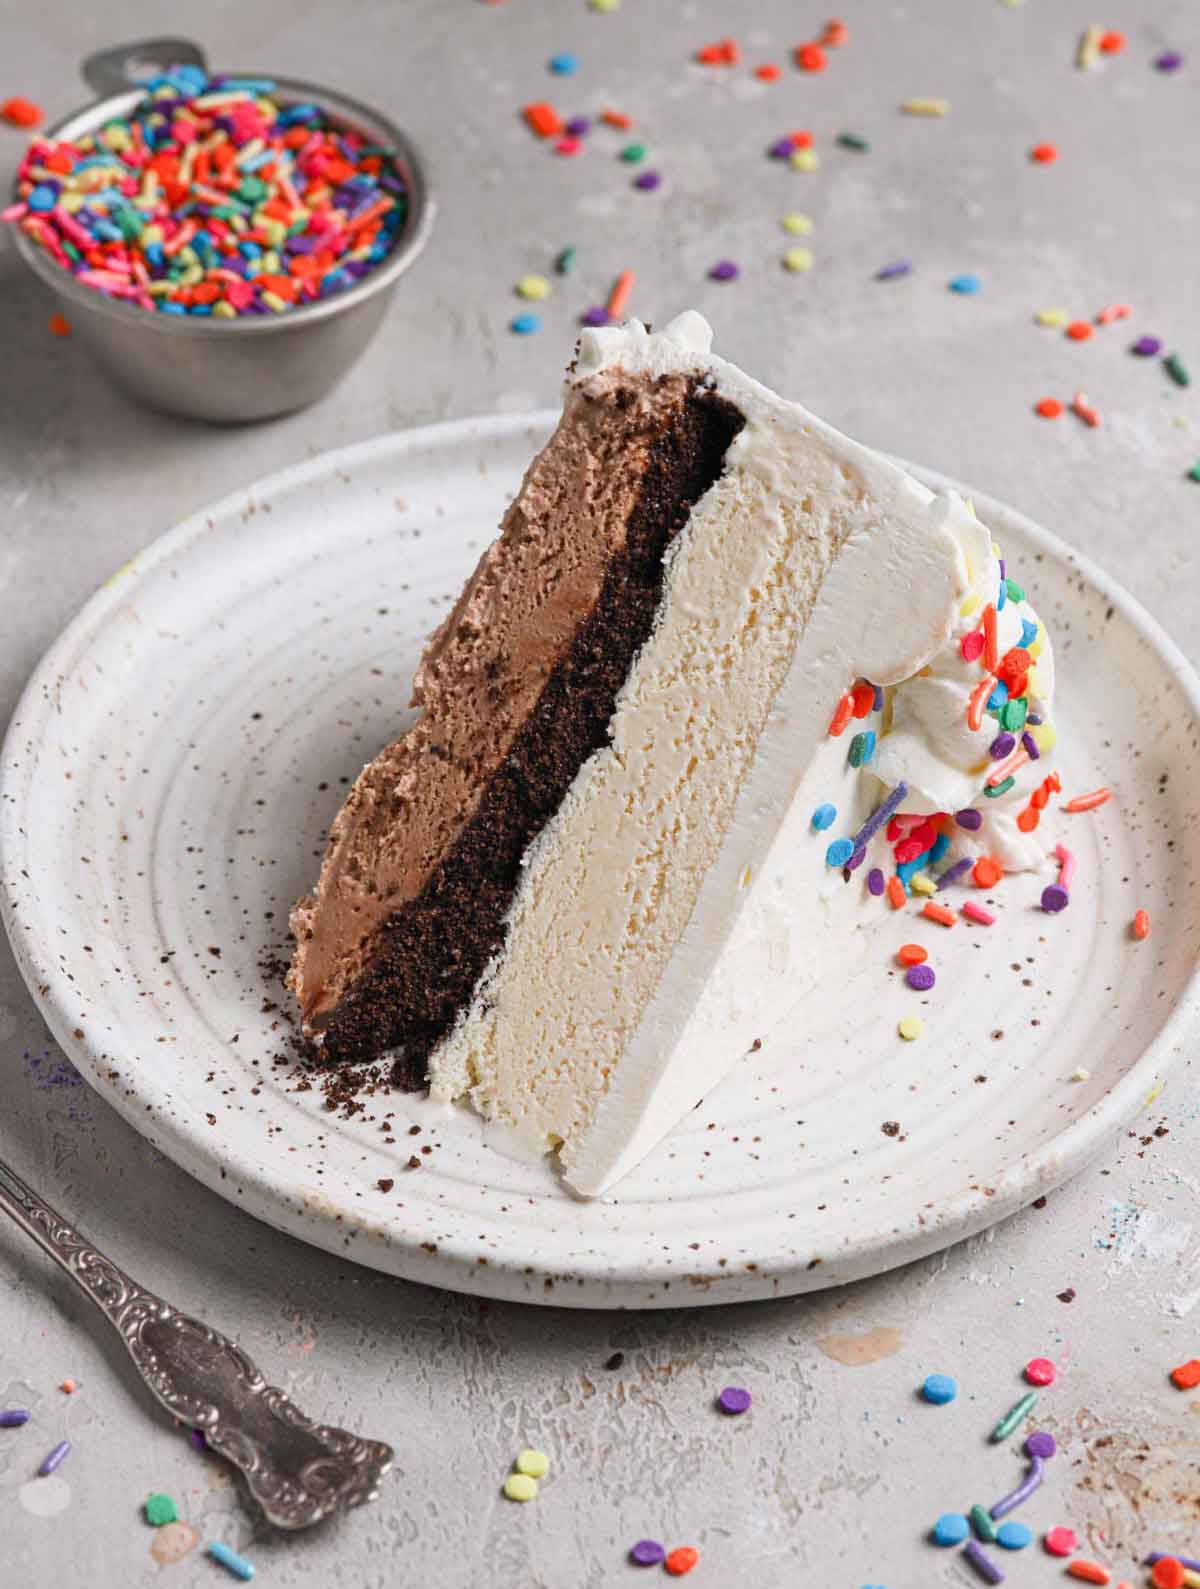 A slice of ice cream cake with layers of chocolate and vanilla ice cream, hot fudge and chopped Oreos on a white plate with sprinkles on top and around.